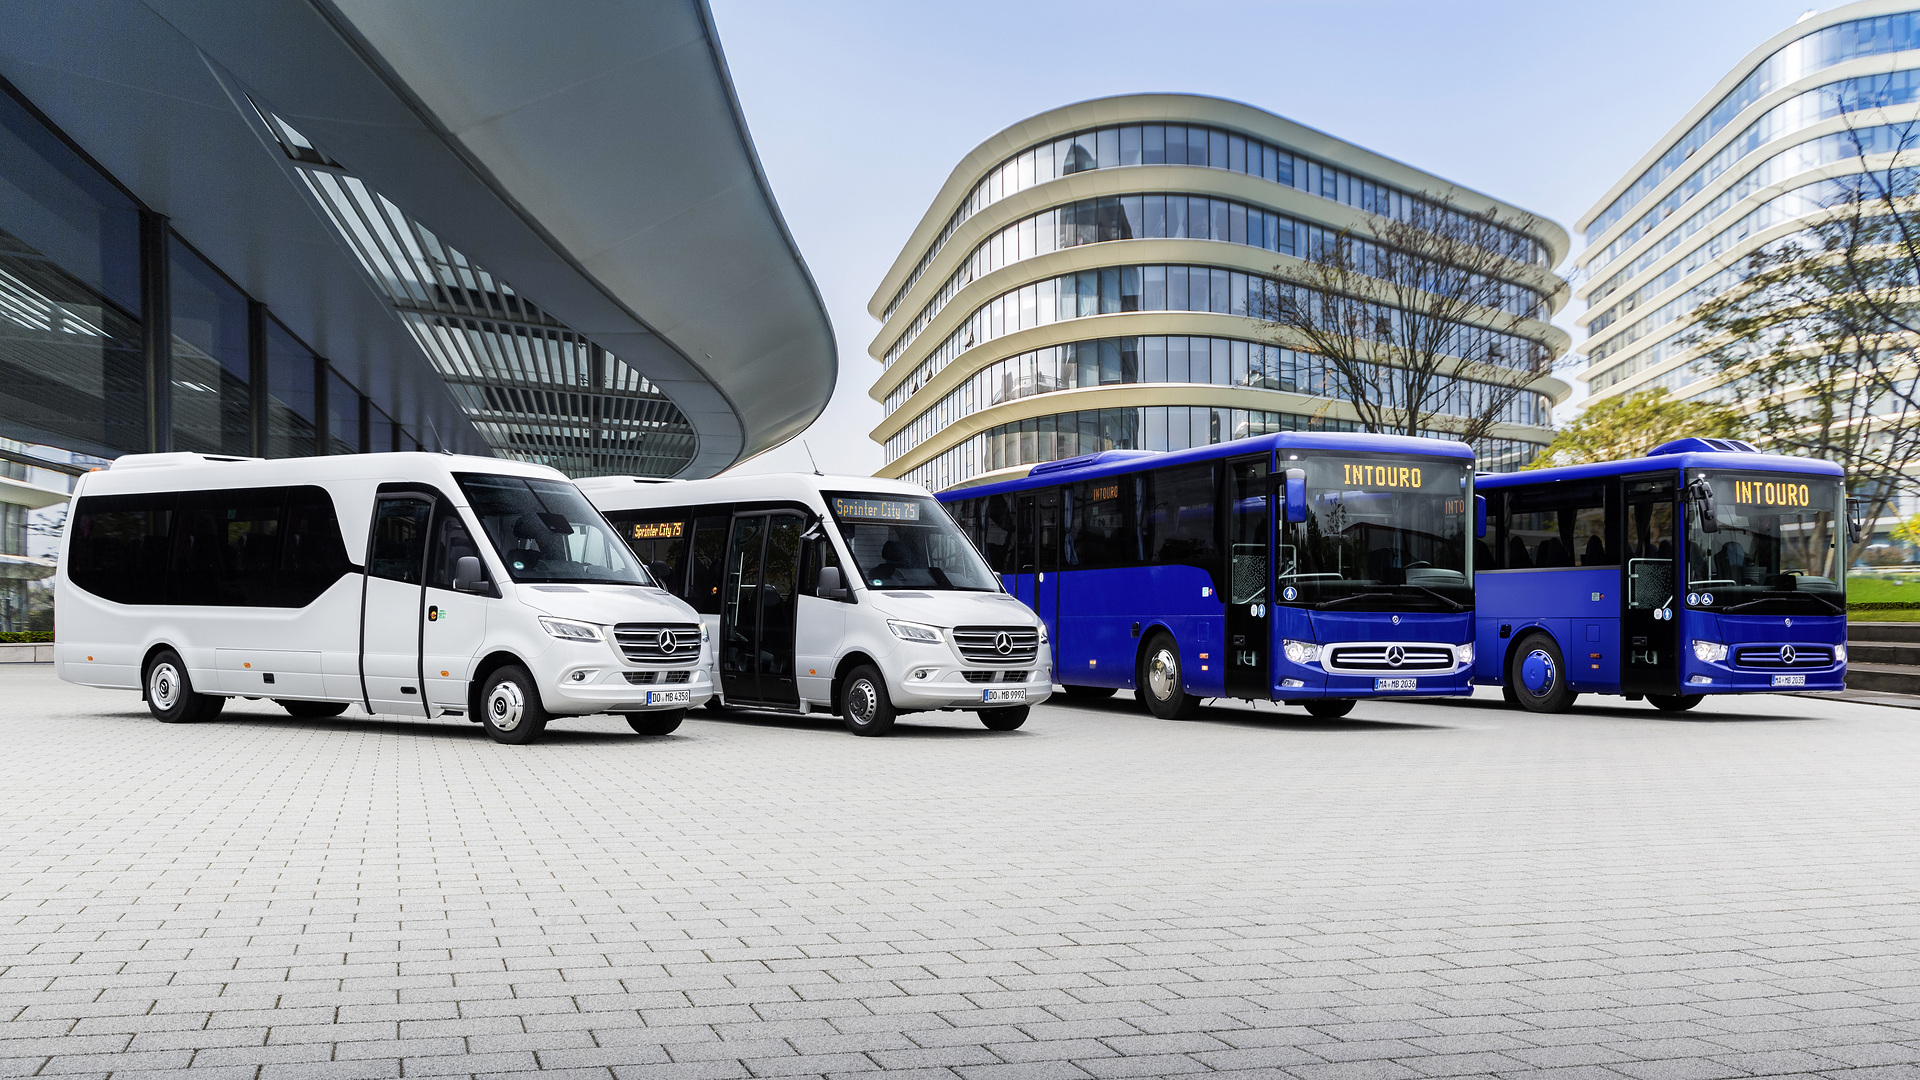 Record order from Portugal: Daimler Buses has delivered 864 buses to the Área Metropolitana de Lisboa (AML), the region surrounding the country's capital Lisbon